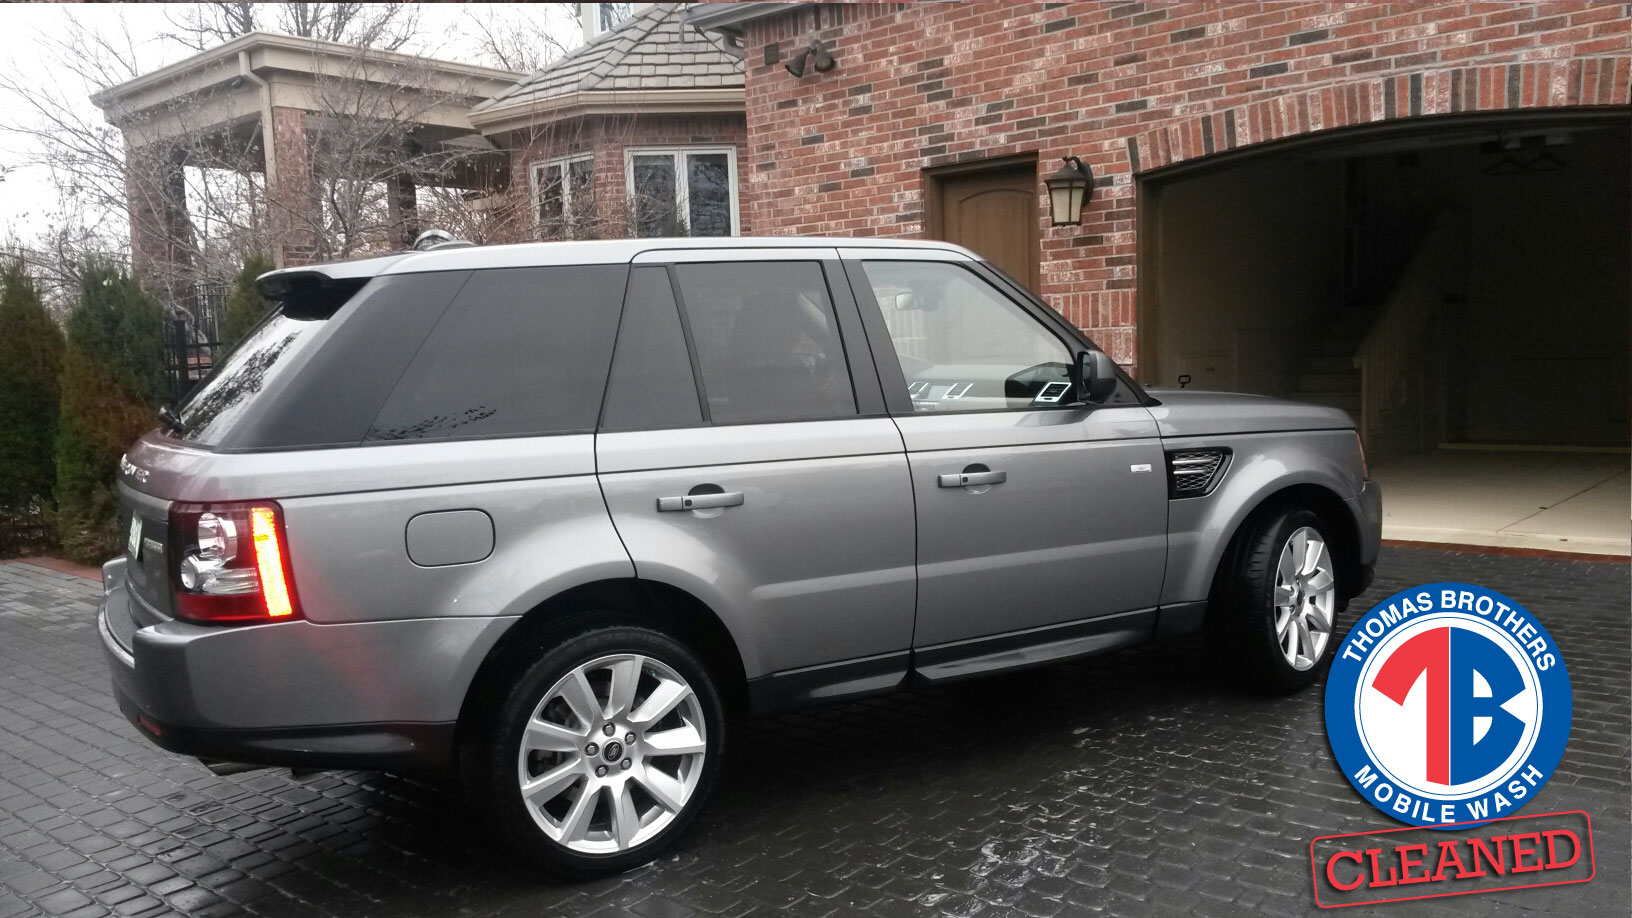 Range Rover power washed clean